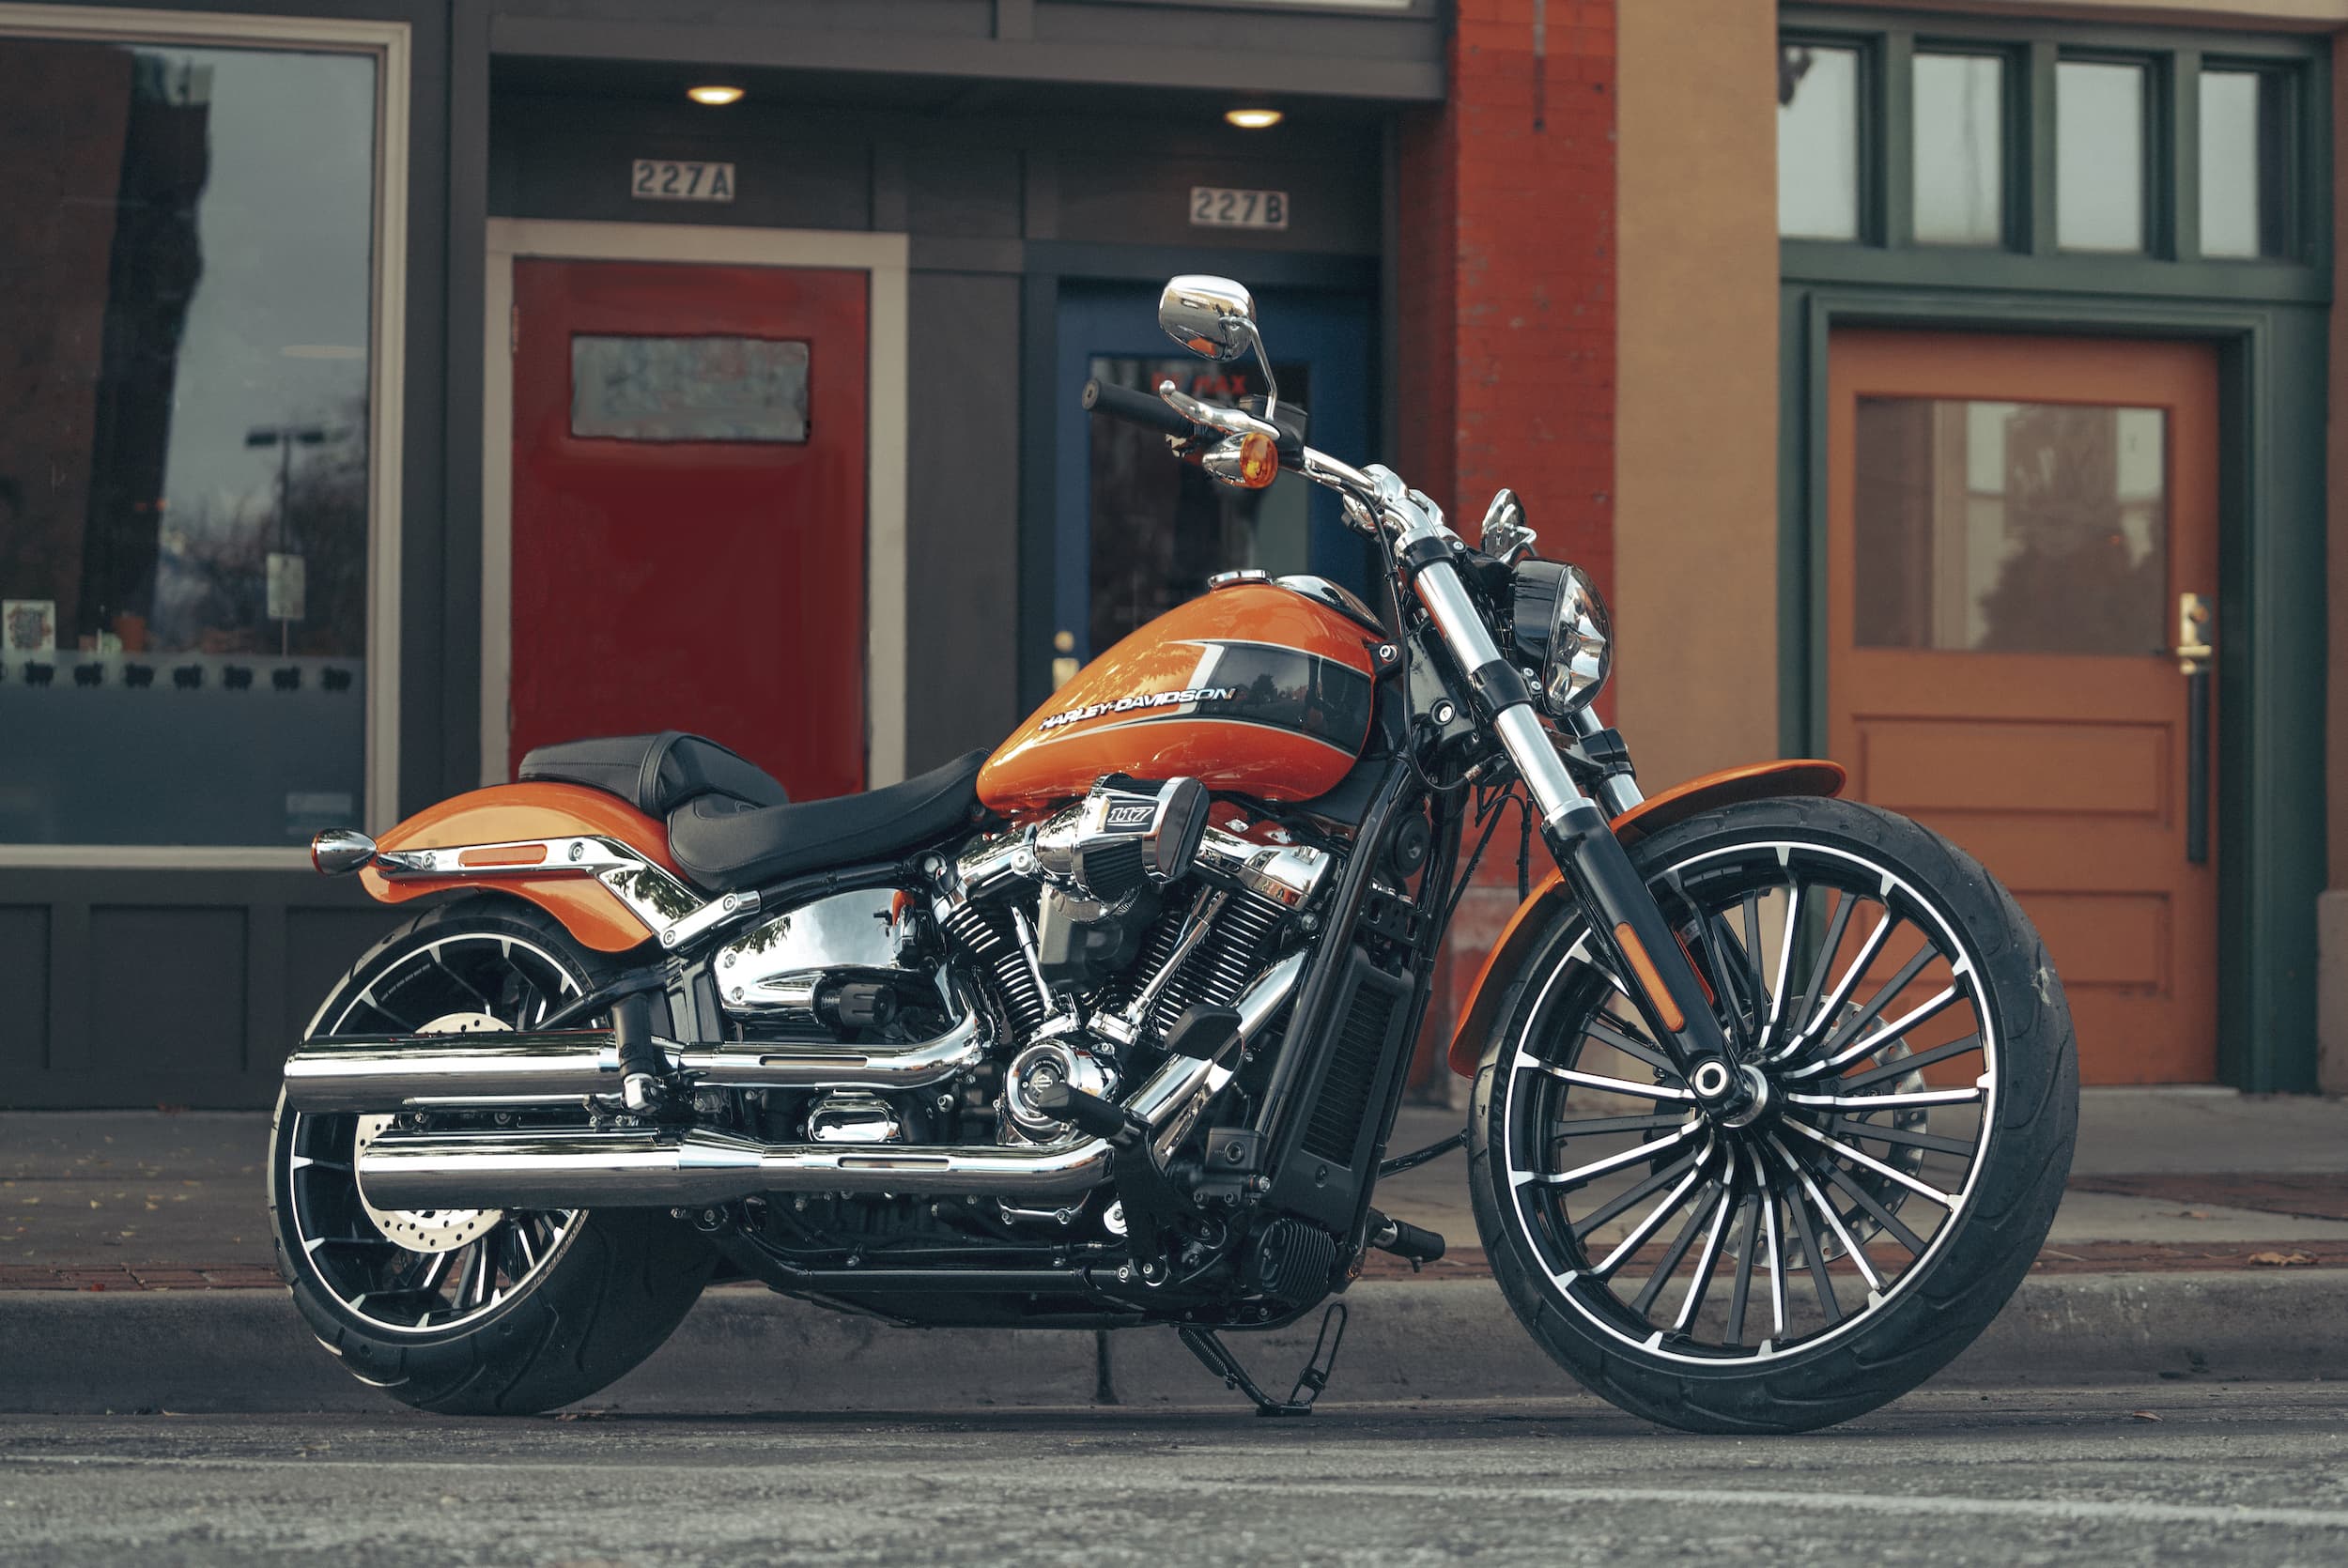 210 Harley-Davidson - It's in the Bag ideas